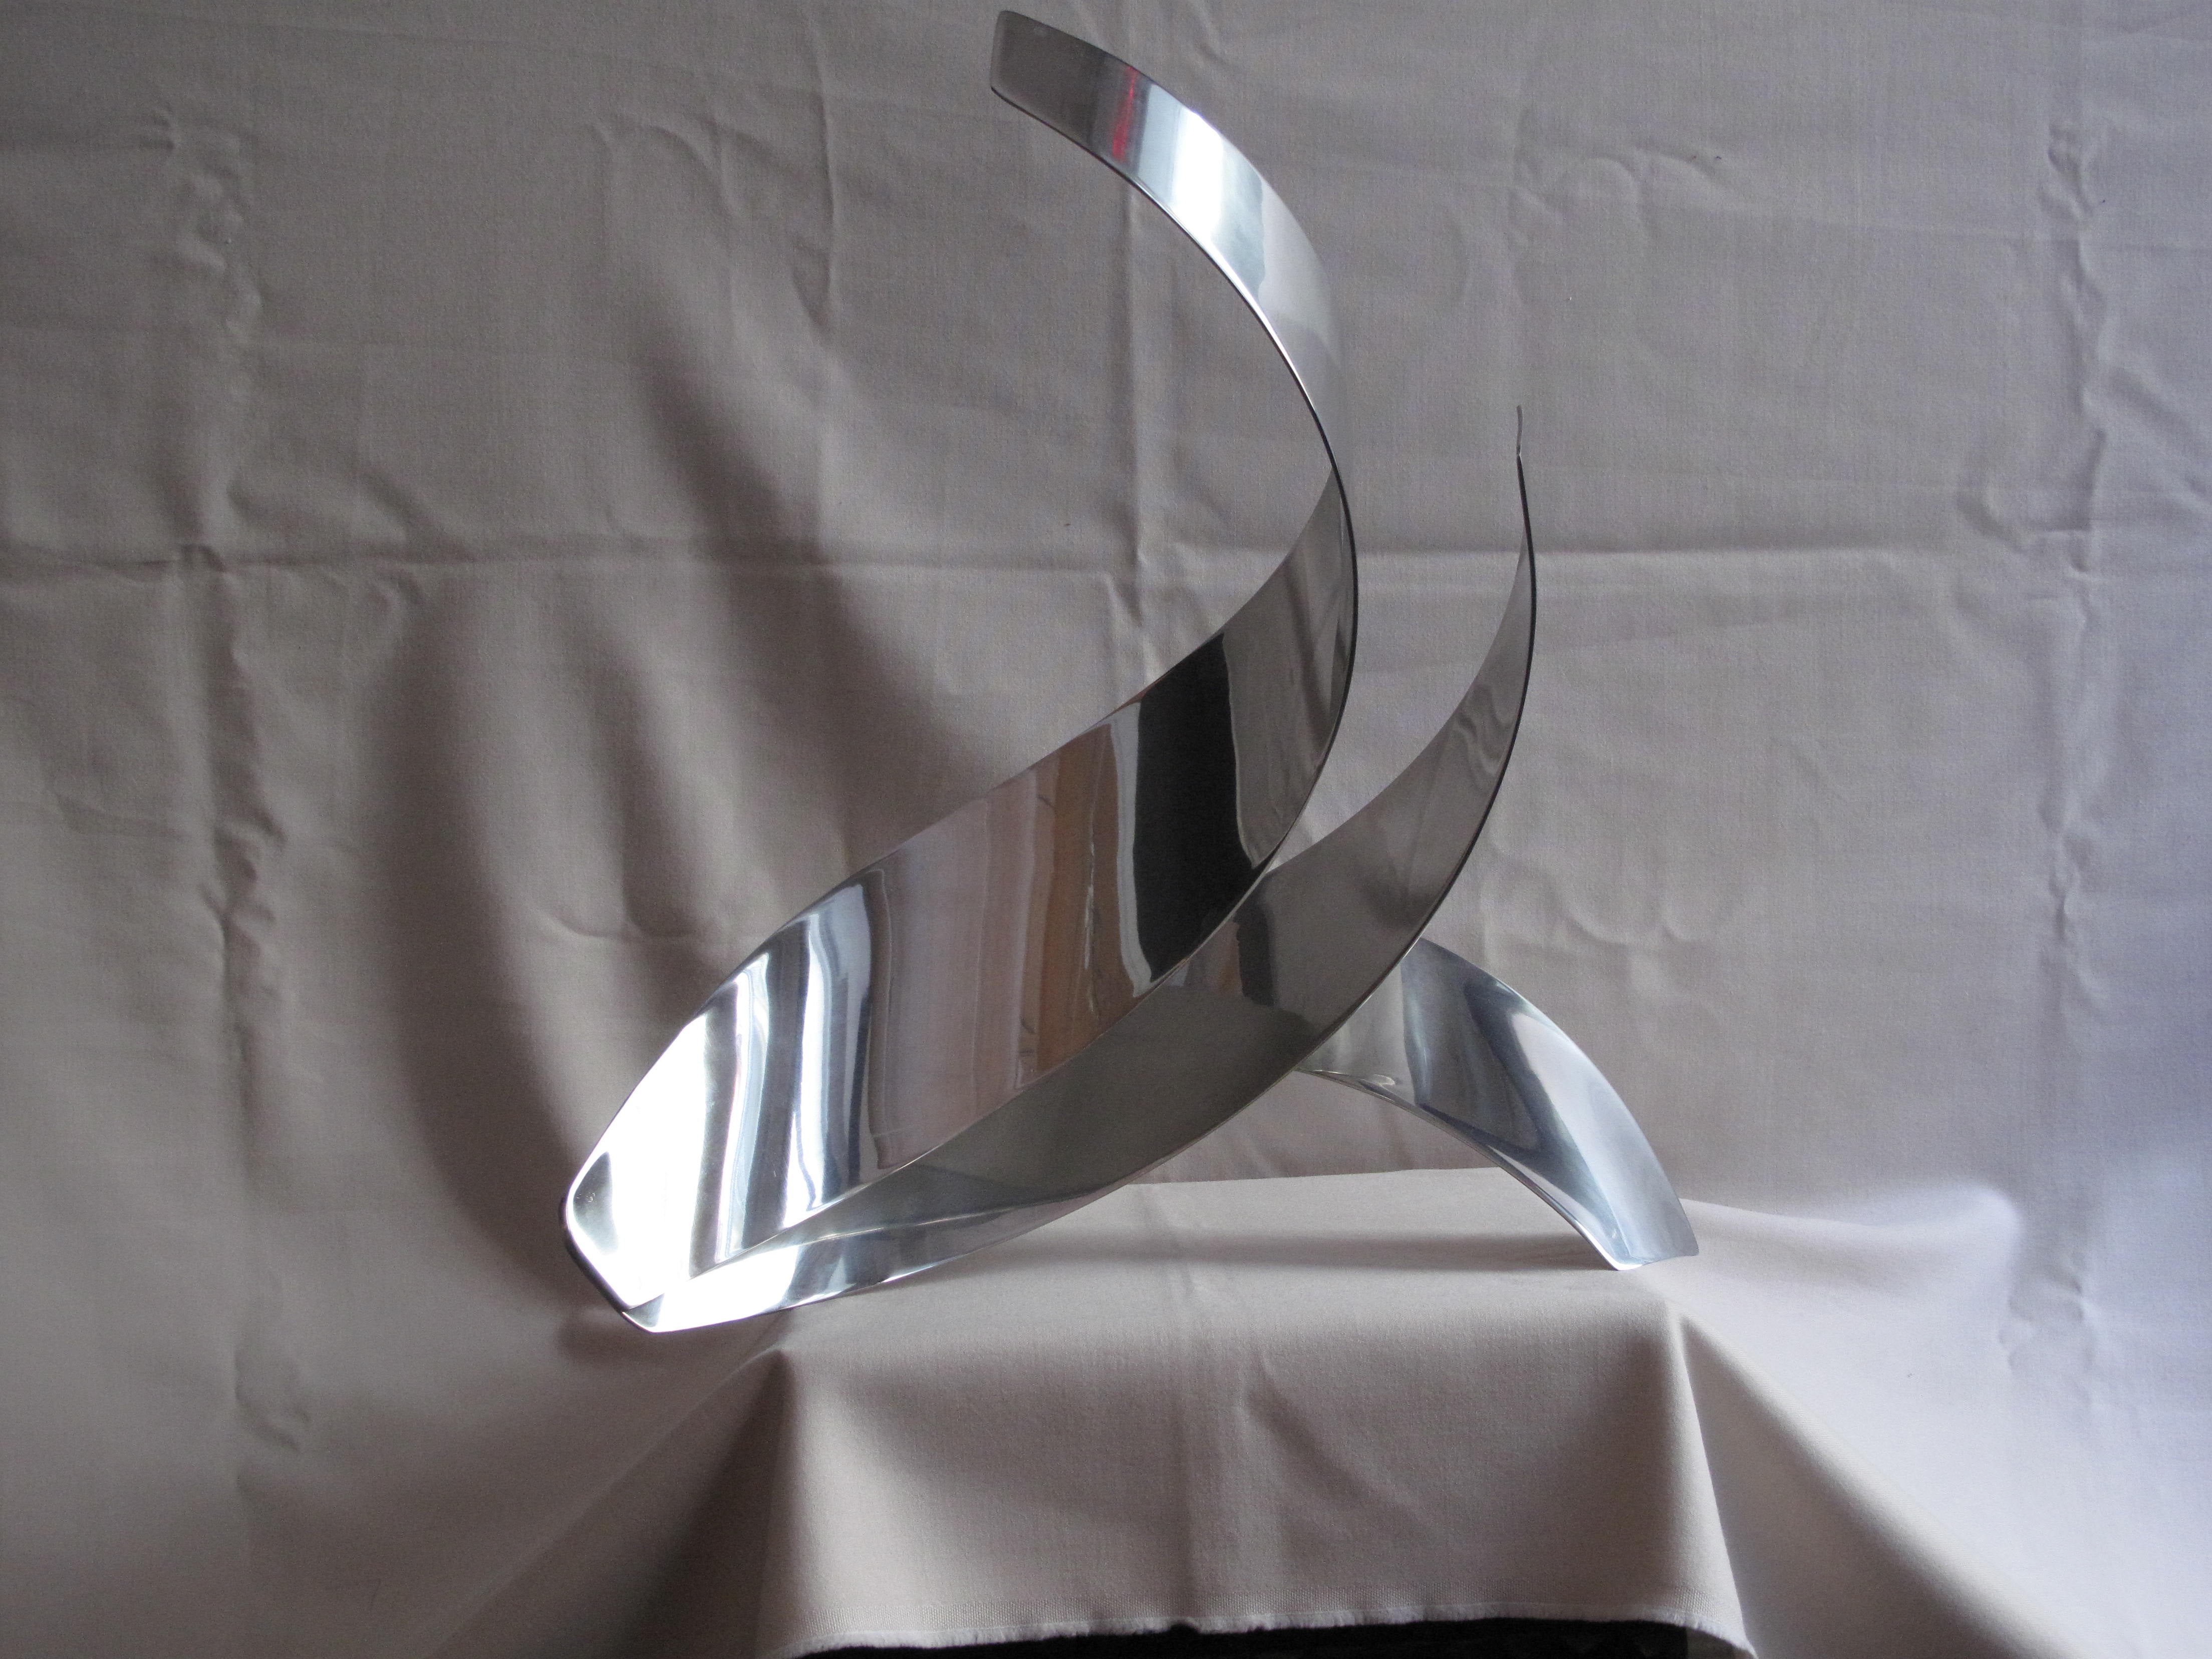 1970s Stainless Steel Sculpture by Jack Arnold